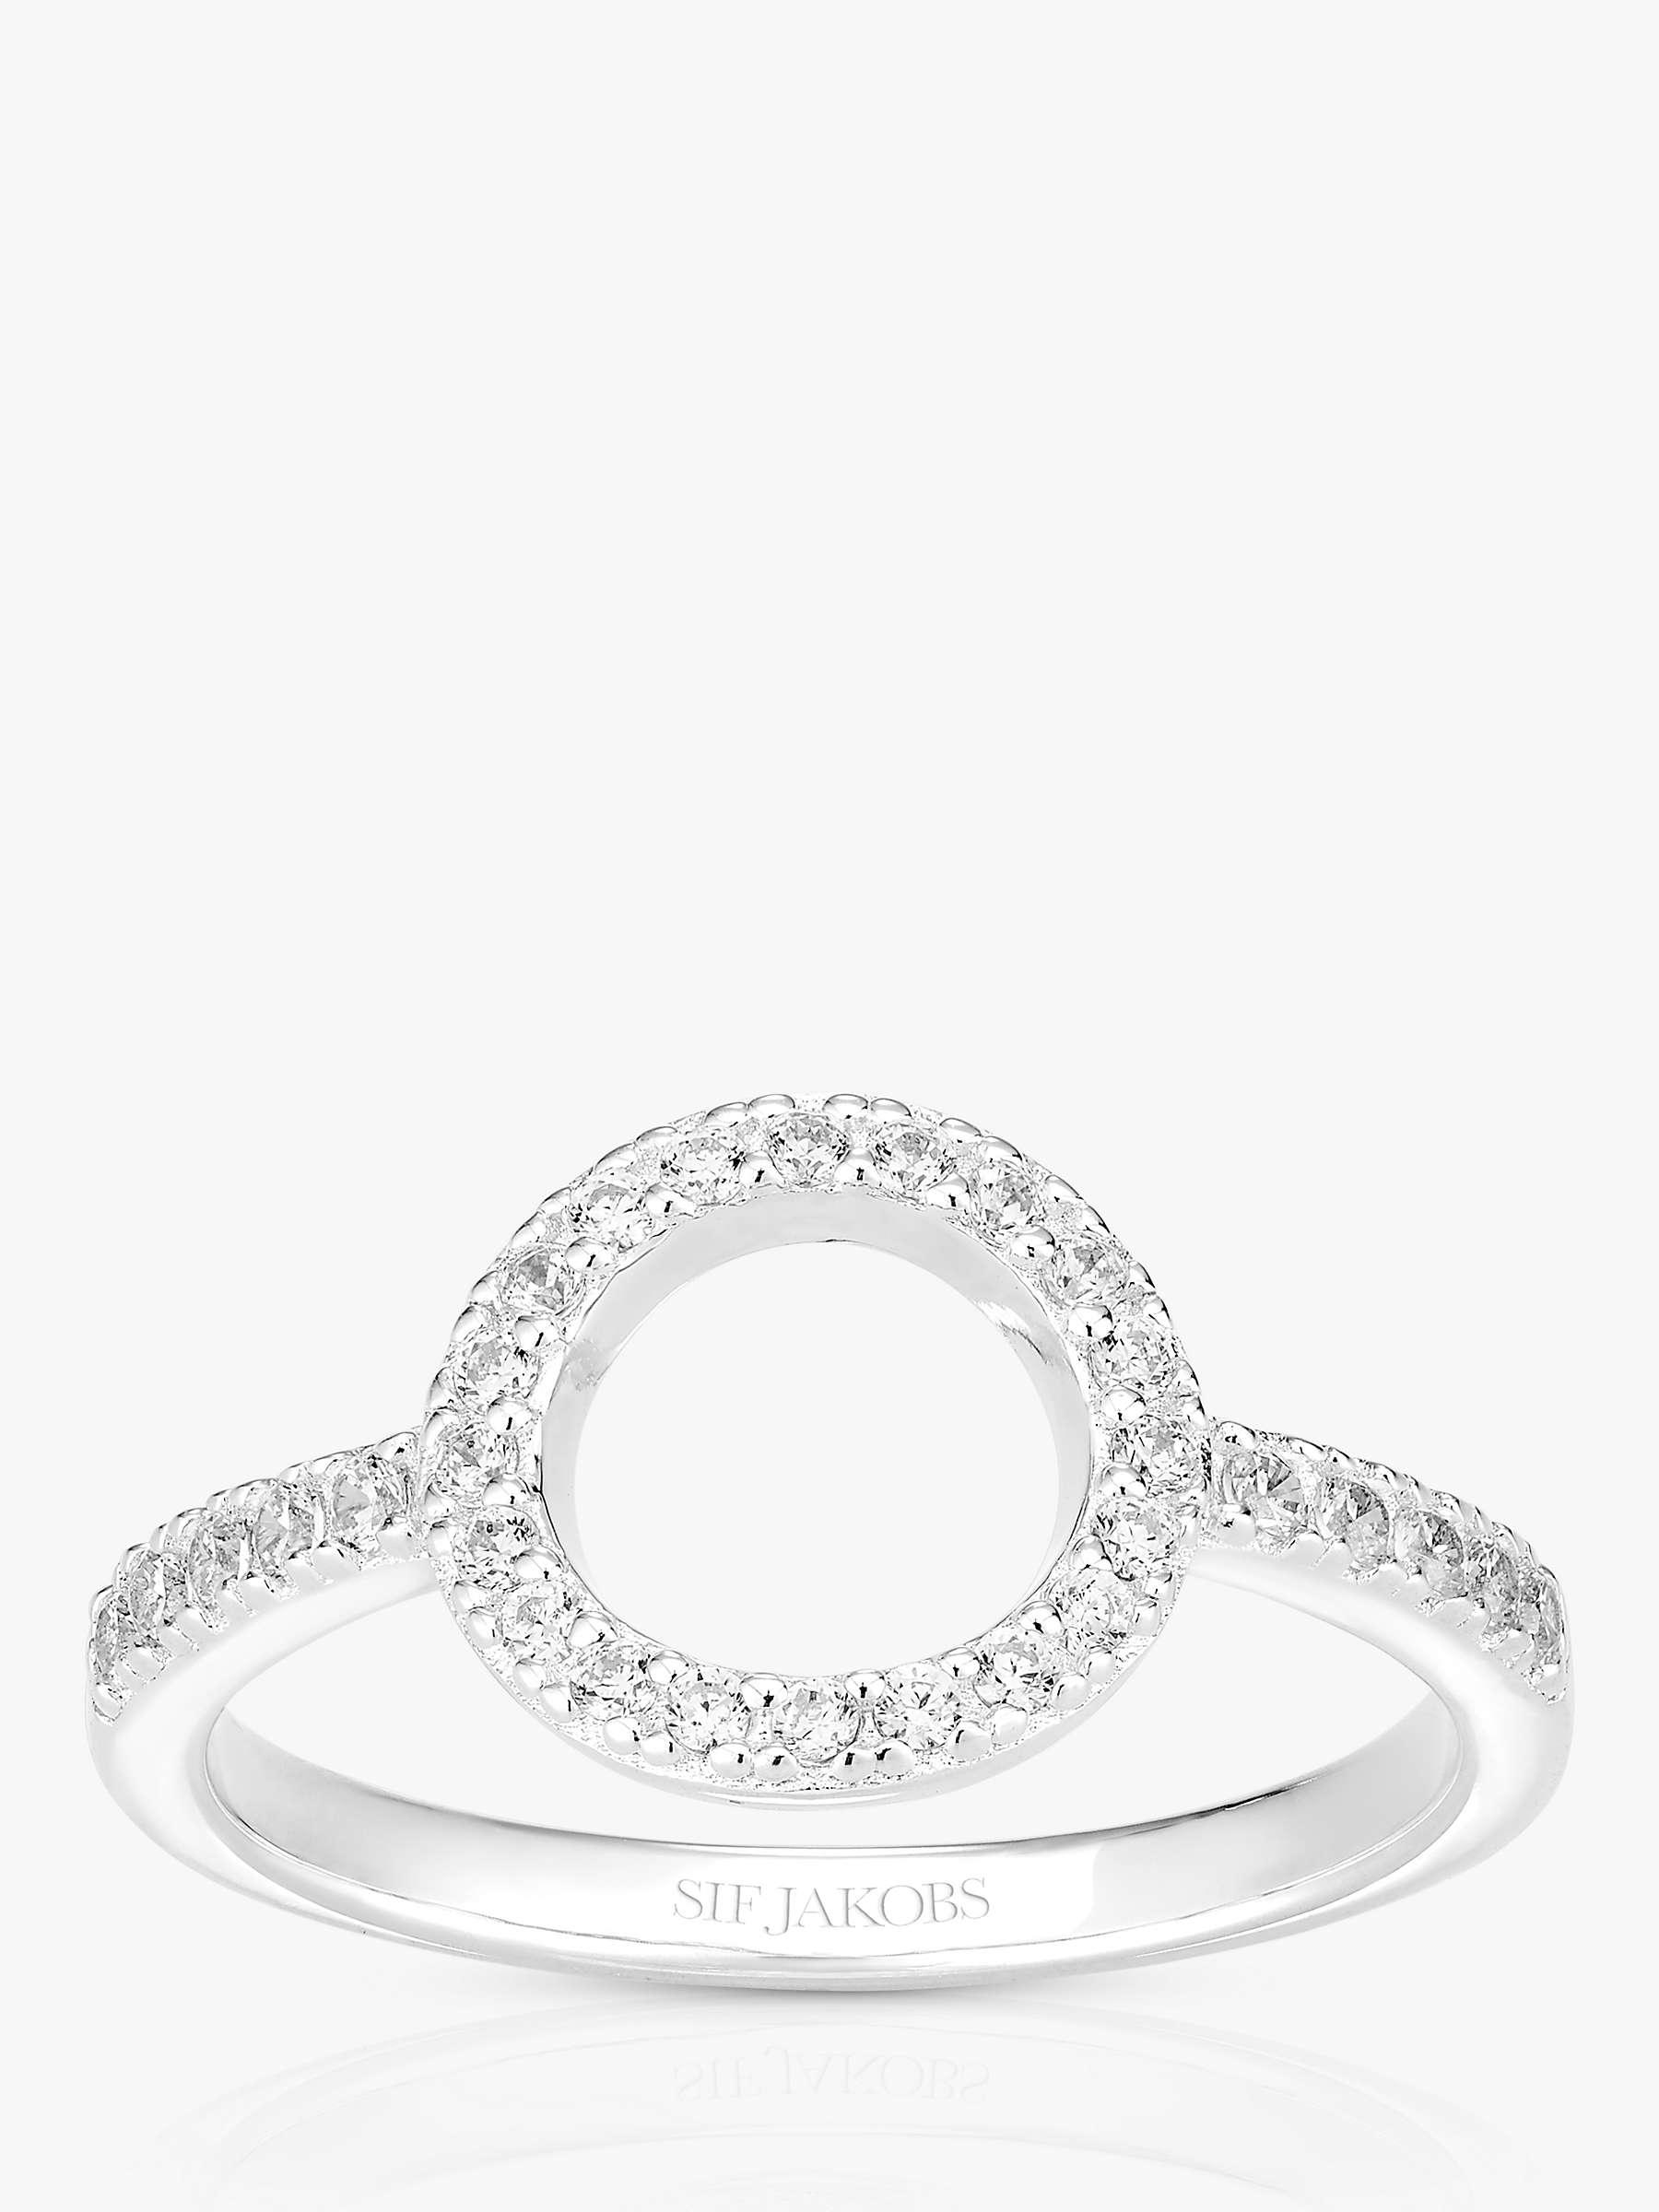 Buy Sif Jakobs Jewellery Cubic Zirconia Circle Ring Online at johnlewis.com